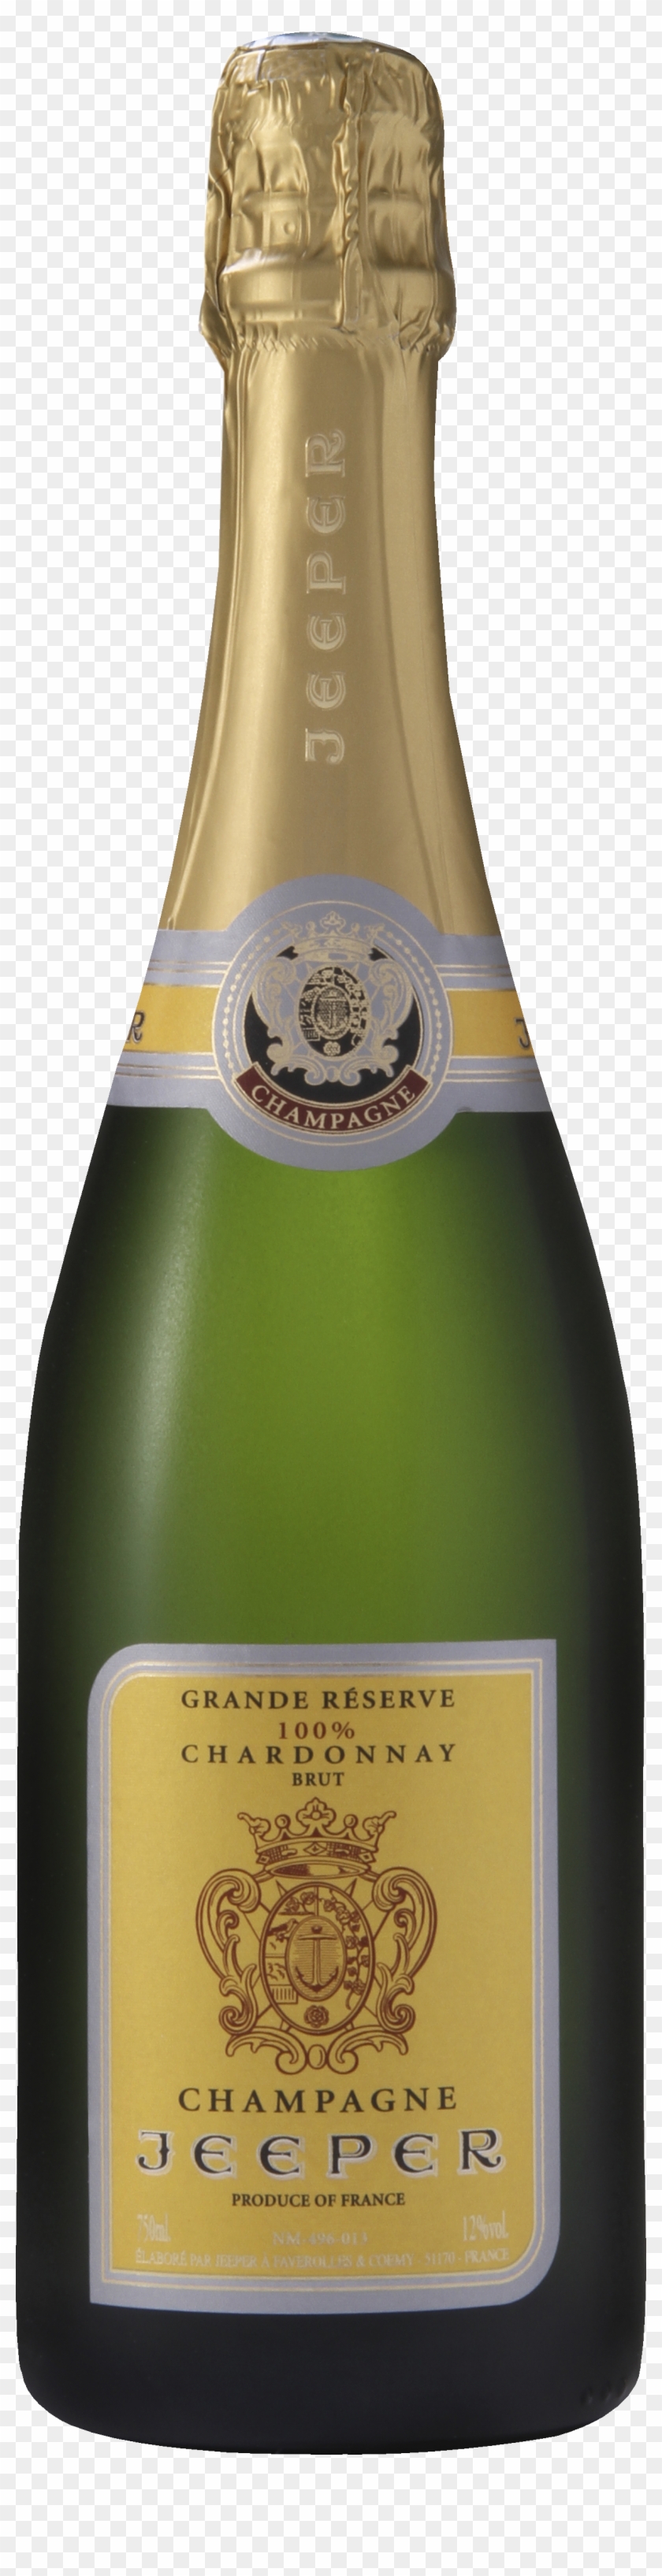 Champagne Png Bottle - Bouteille Champagne Fond Blanc Clipart #71395